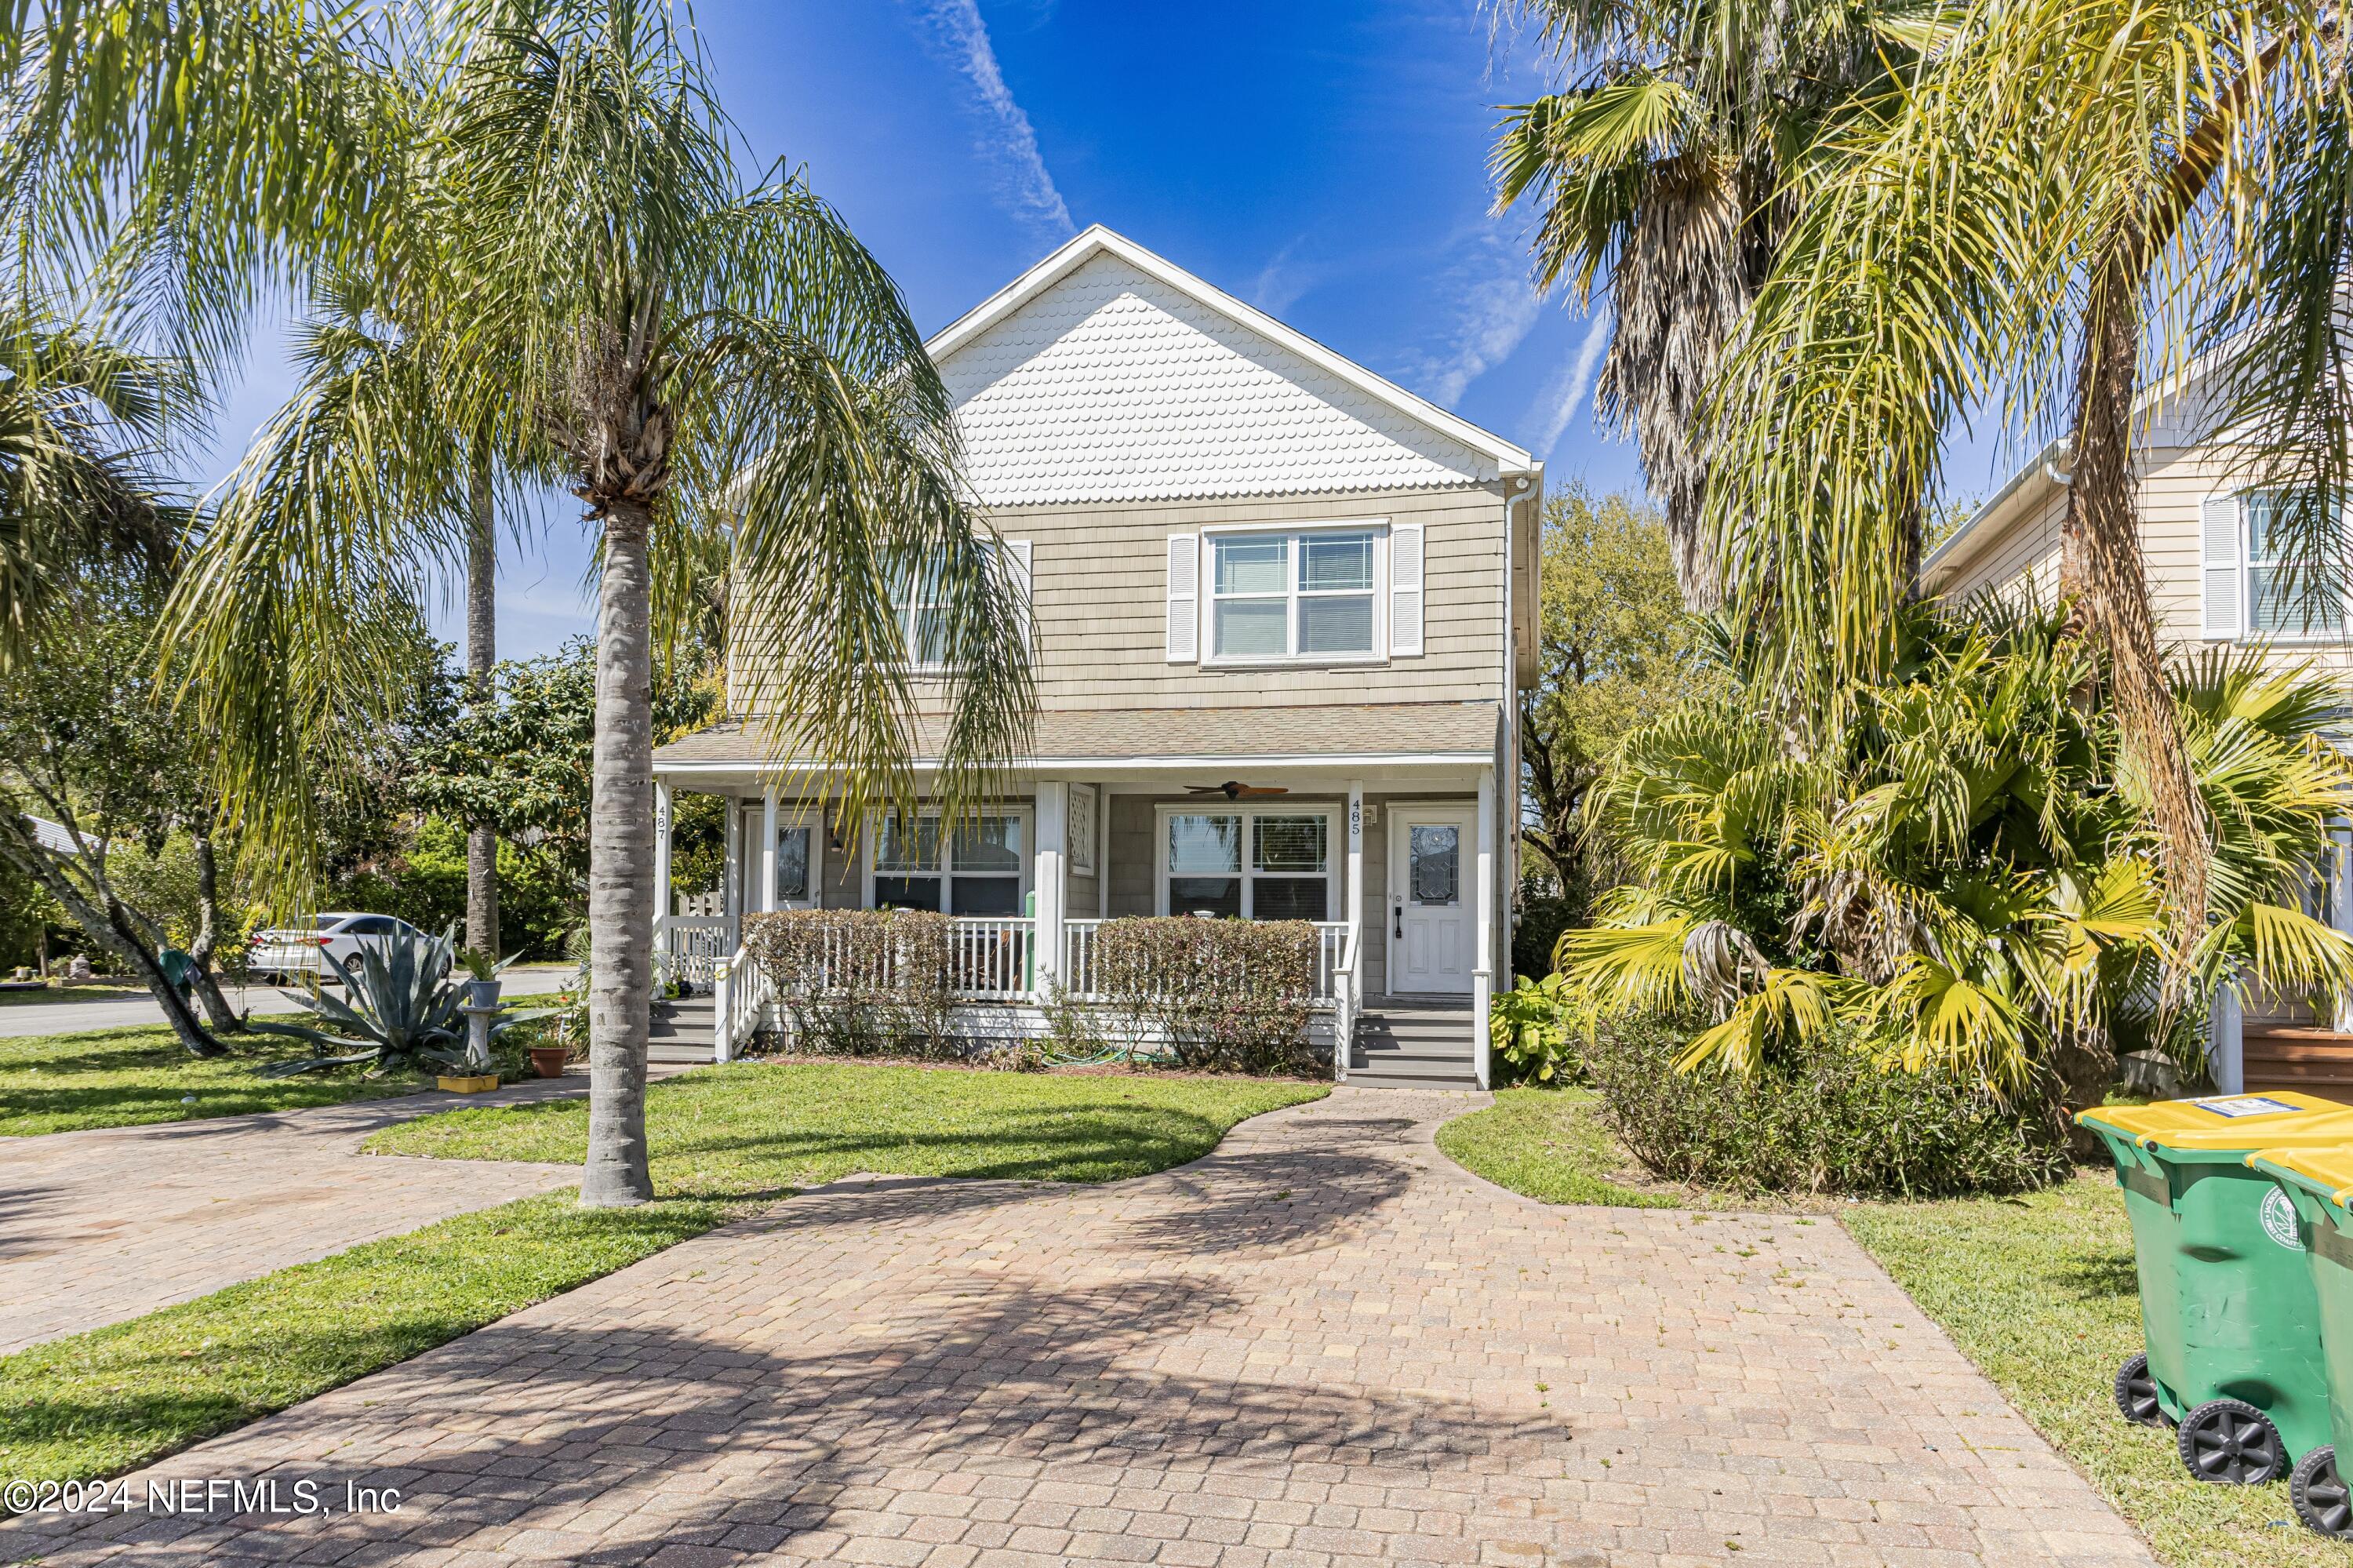 Jacksonville Beach, FL home for sale located at 485 4TH Avenue S, Jacksonville Beach, FL 32250